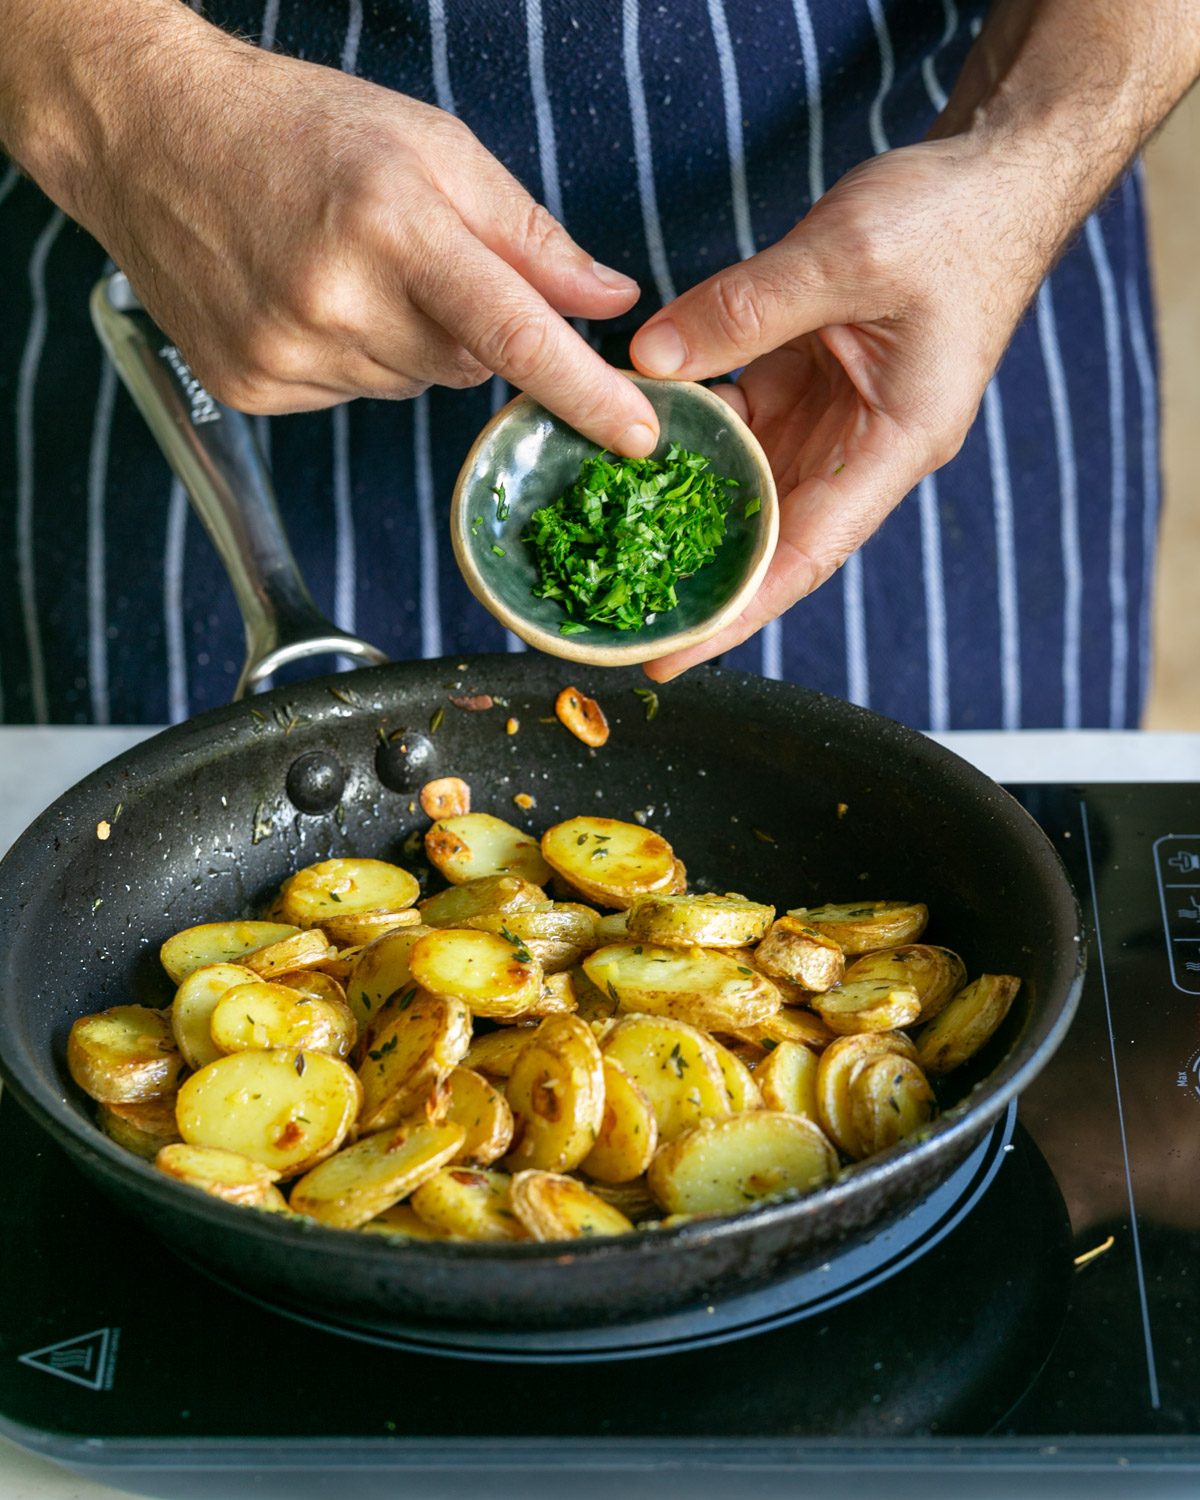 Chopped parsley added to cooked potatoes